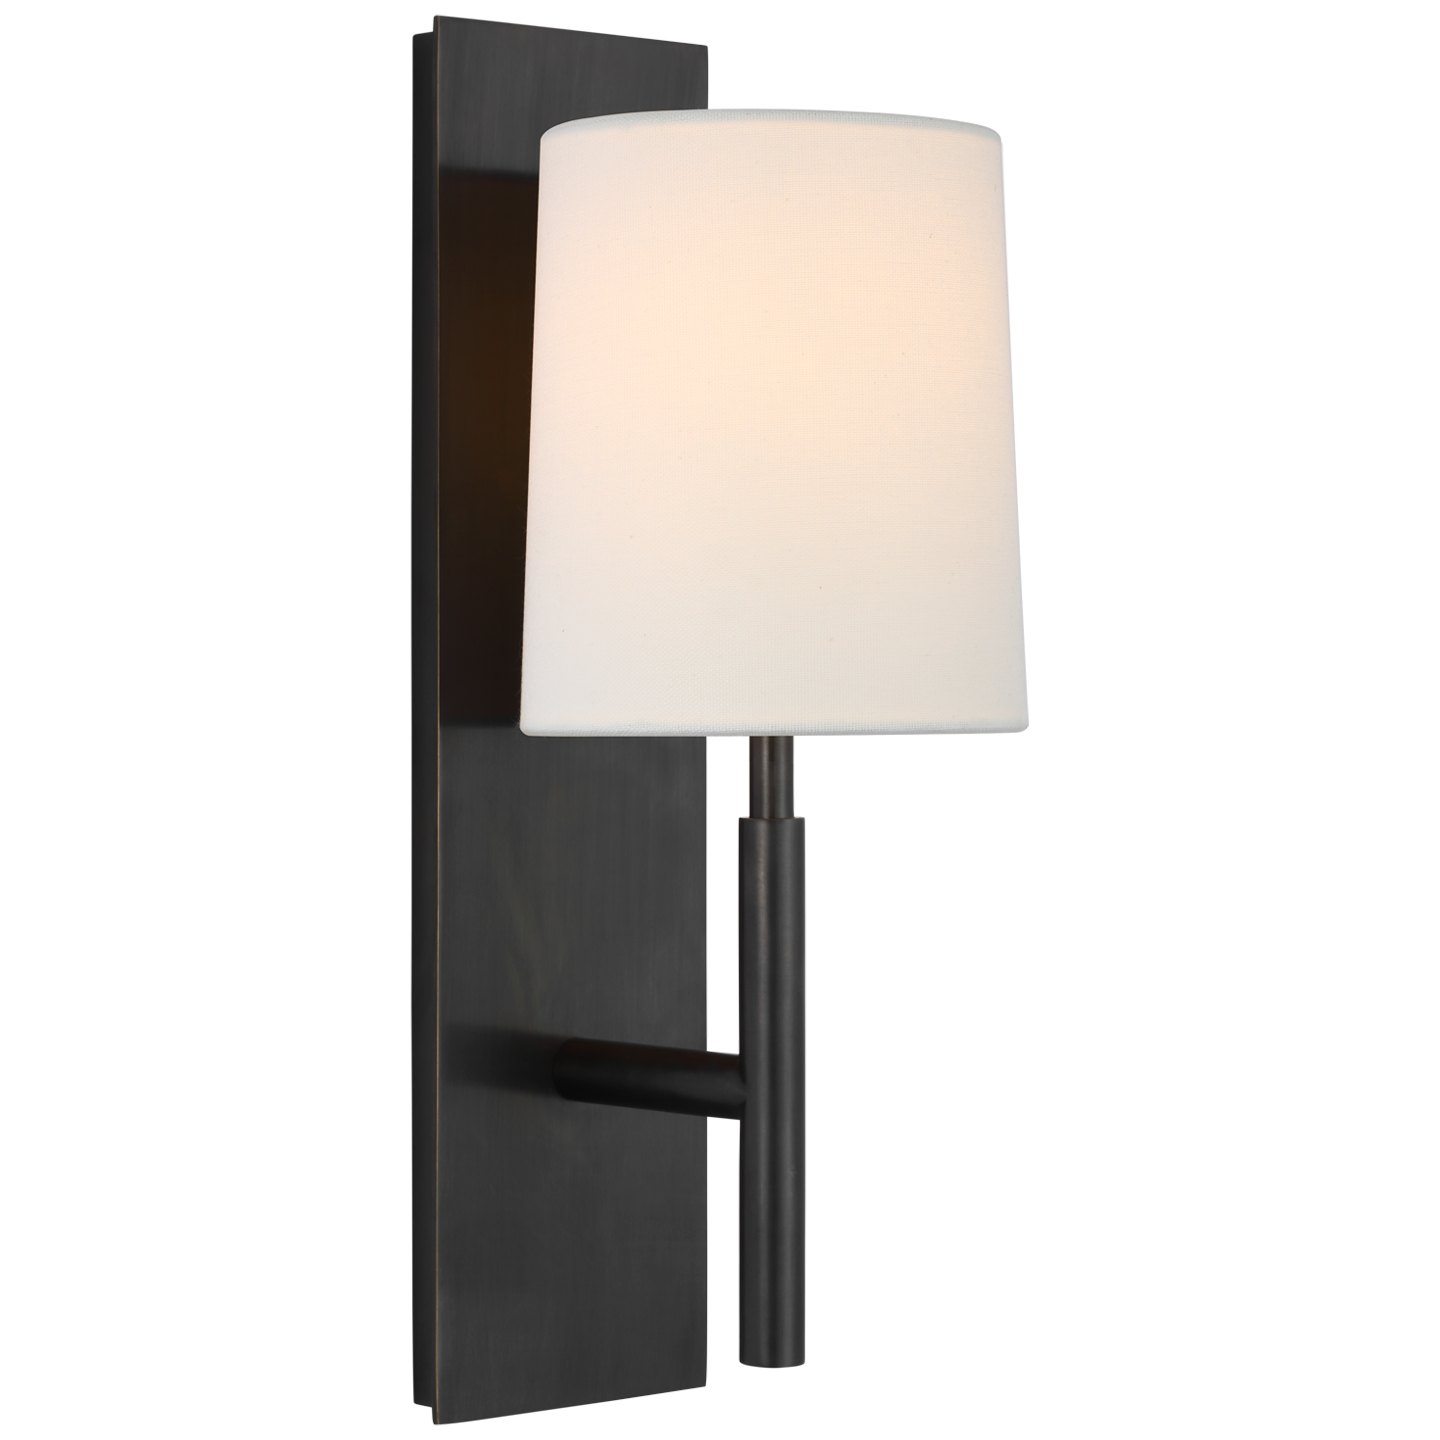 This Clarion Medium Sconce is so dreamy with the linen shade and thick back plate. We'd love to see these lined down a hallway or in a kitchen to complete the look.   Designer: Barbara Barry